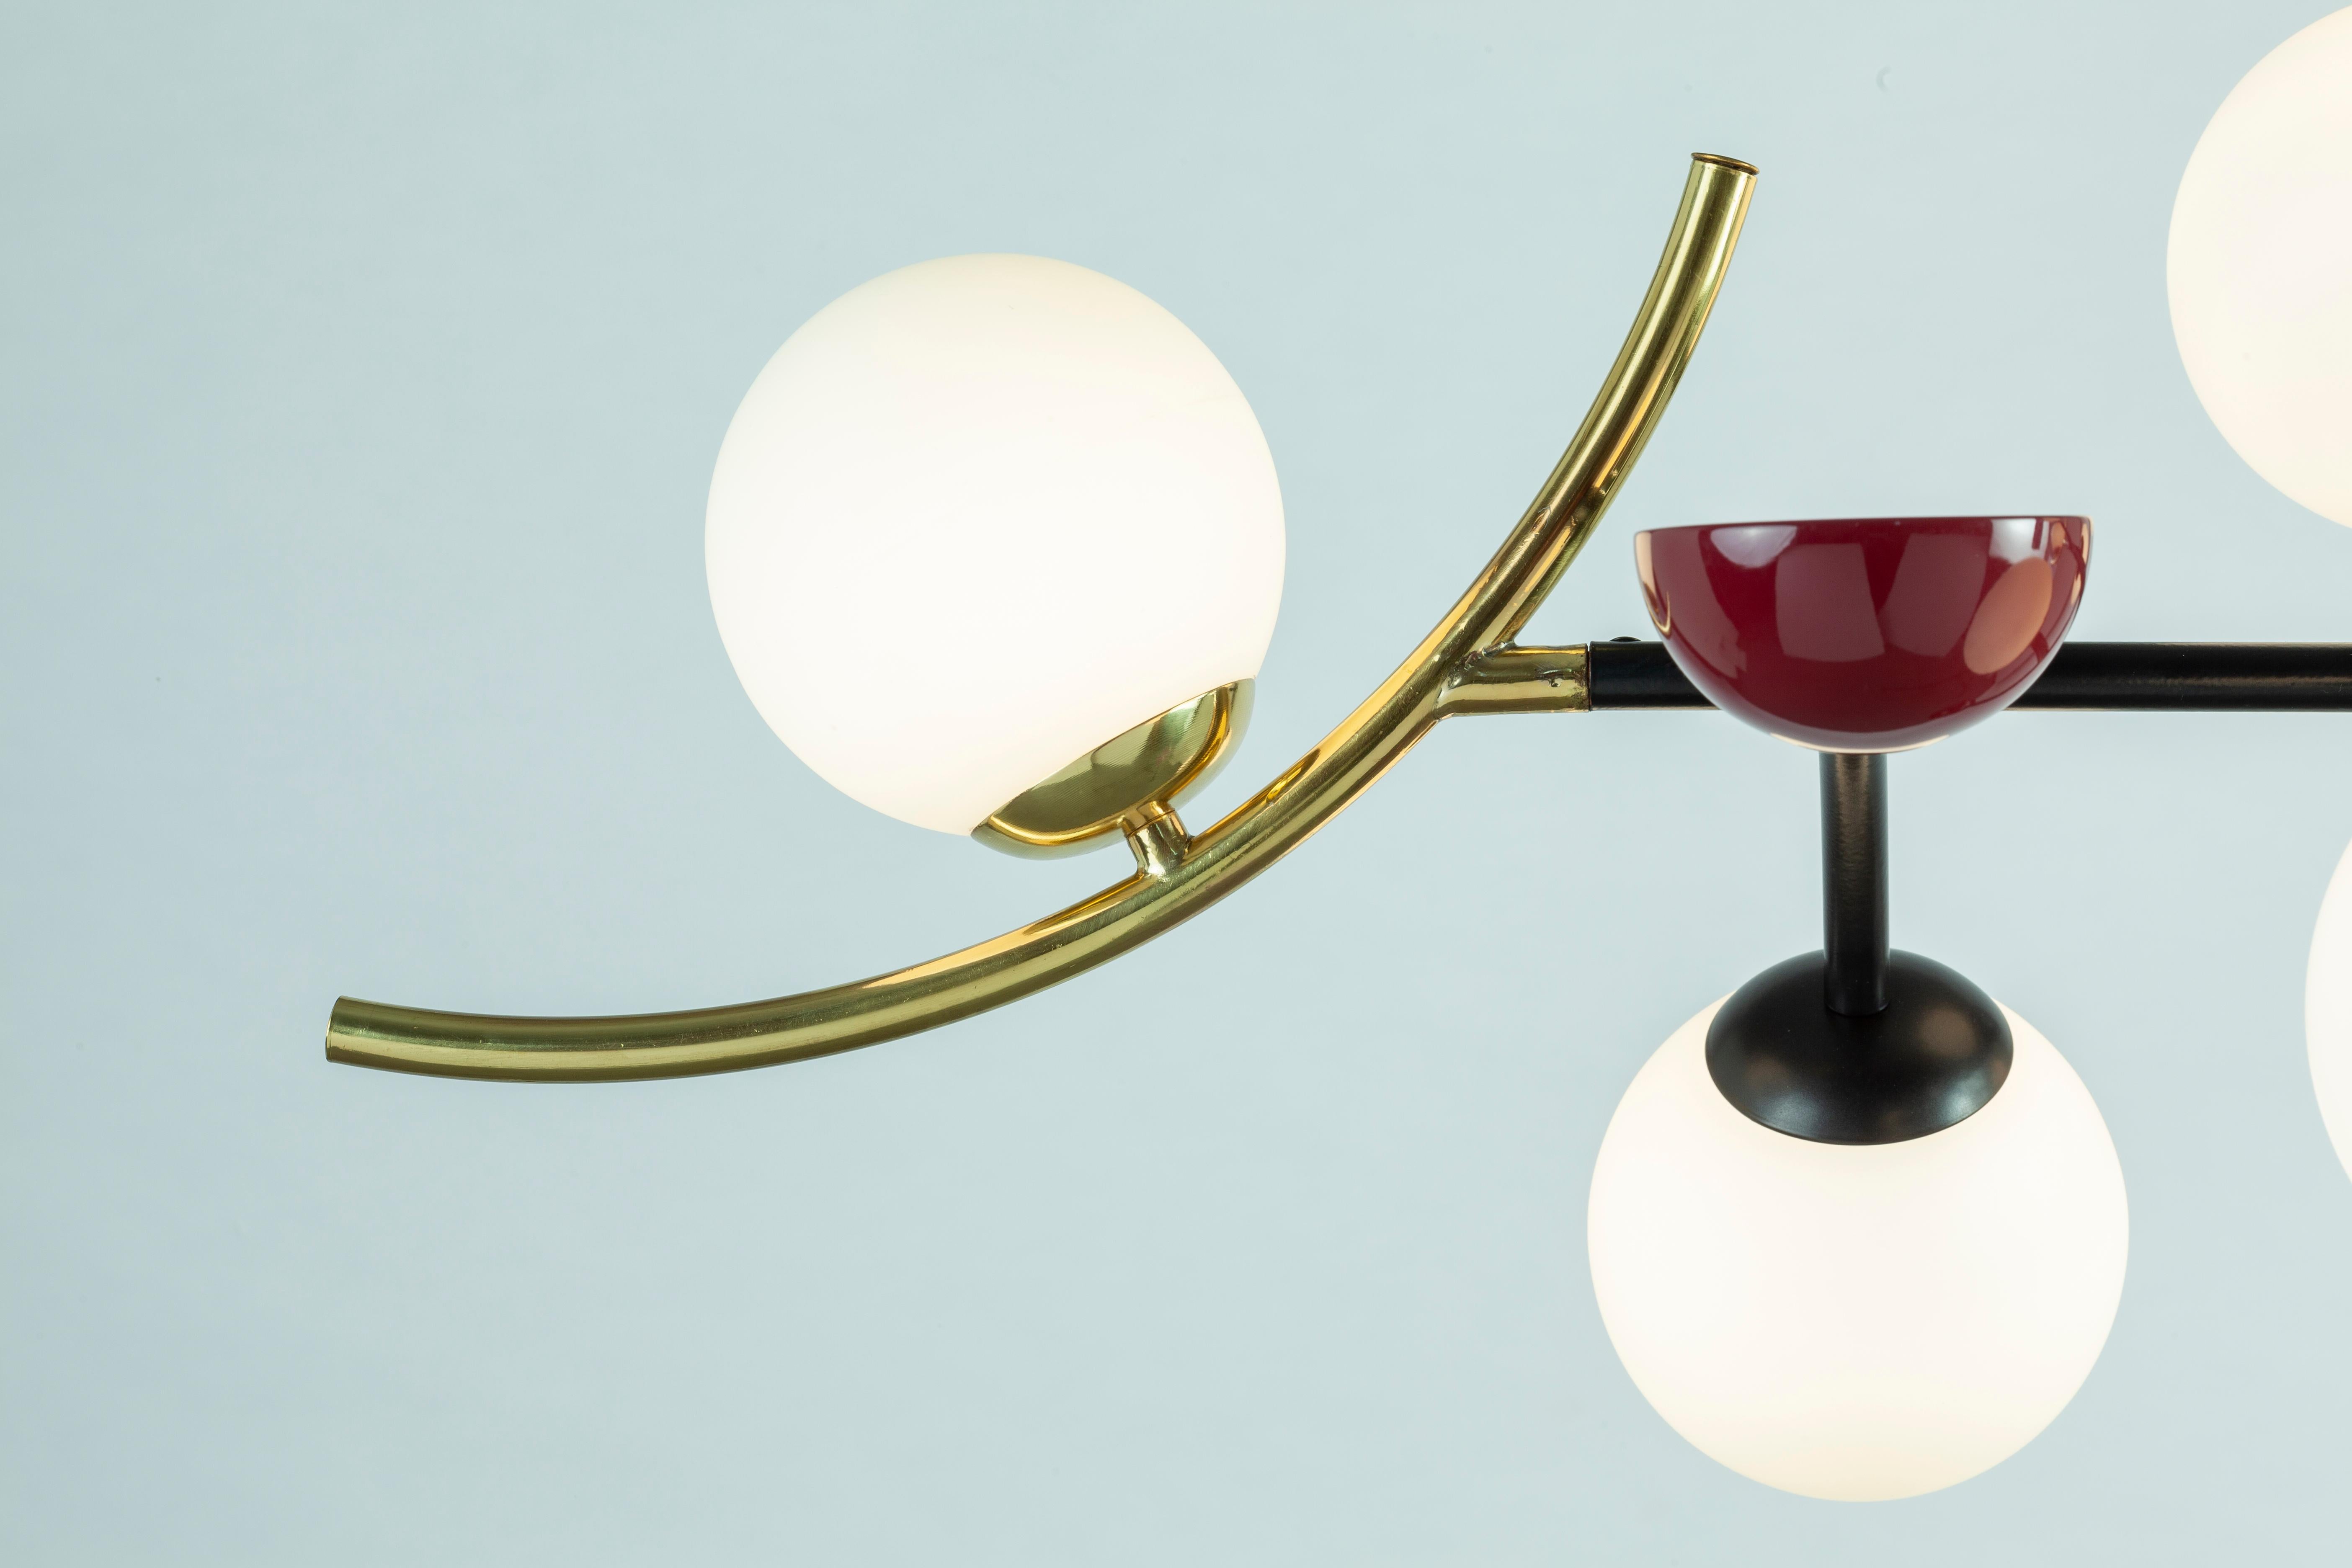 Part ambient light, part artwork, Helio I pendant lamp will highlight any space in all the right ways thanks to its Frosted Glass Globes and sleek Polished Brass details. 

A collection that is raw and expressive yet sophisticated, where each lamp